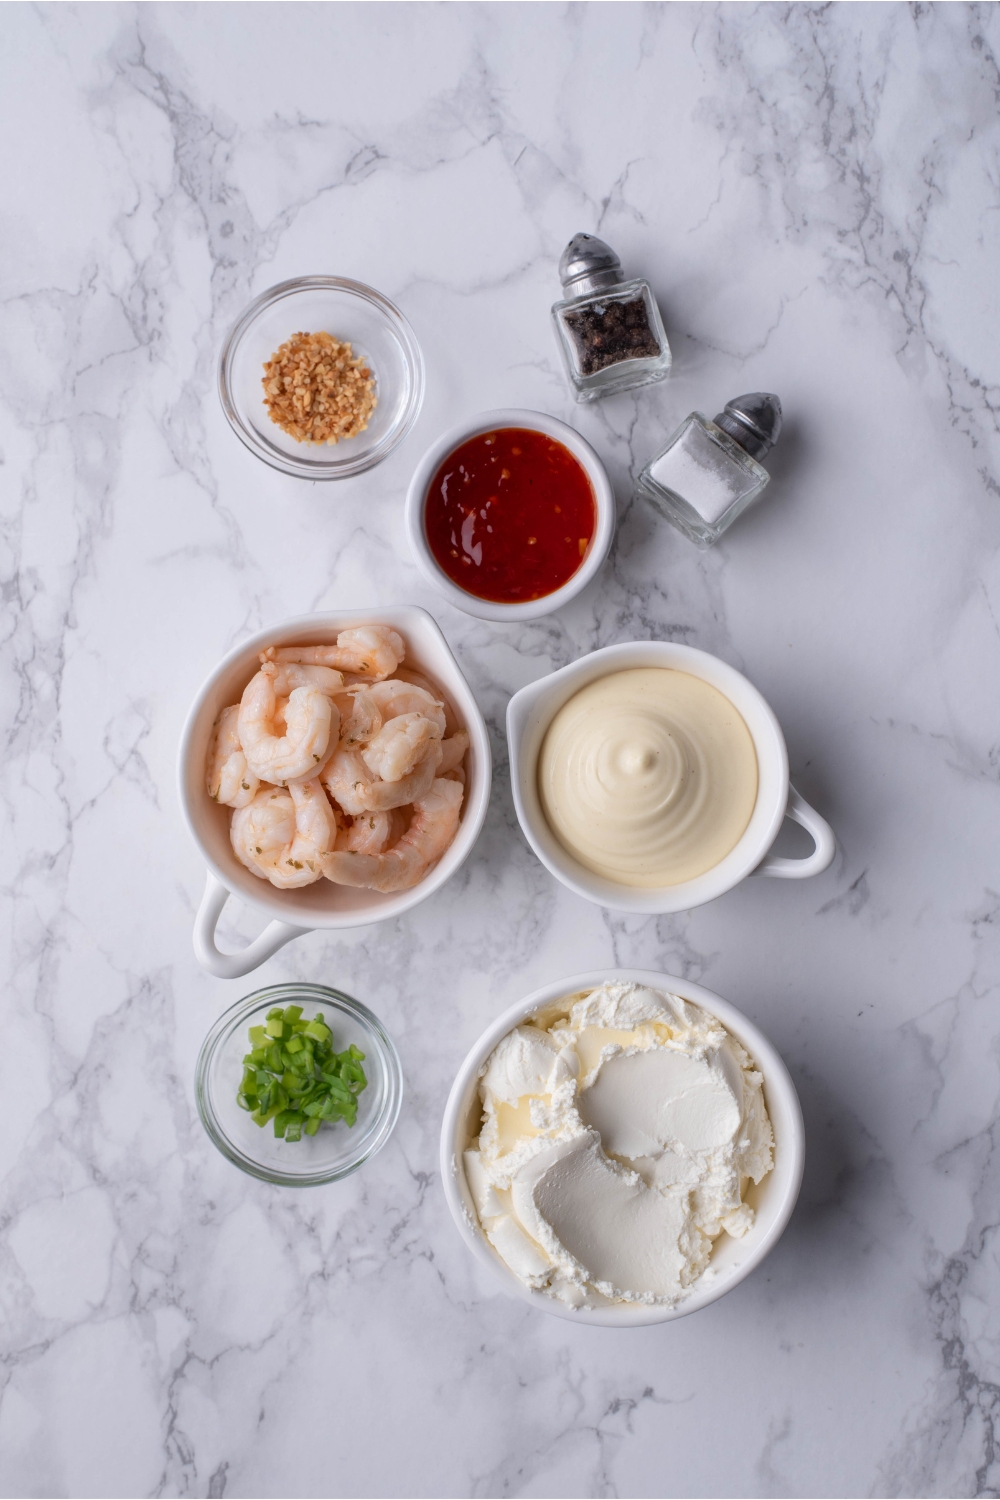 An assortment of ingredients including bowls of cooked shrimp, mayonnaise, cream cheese, diced green onion, chili sauce, and spices.